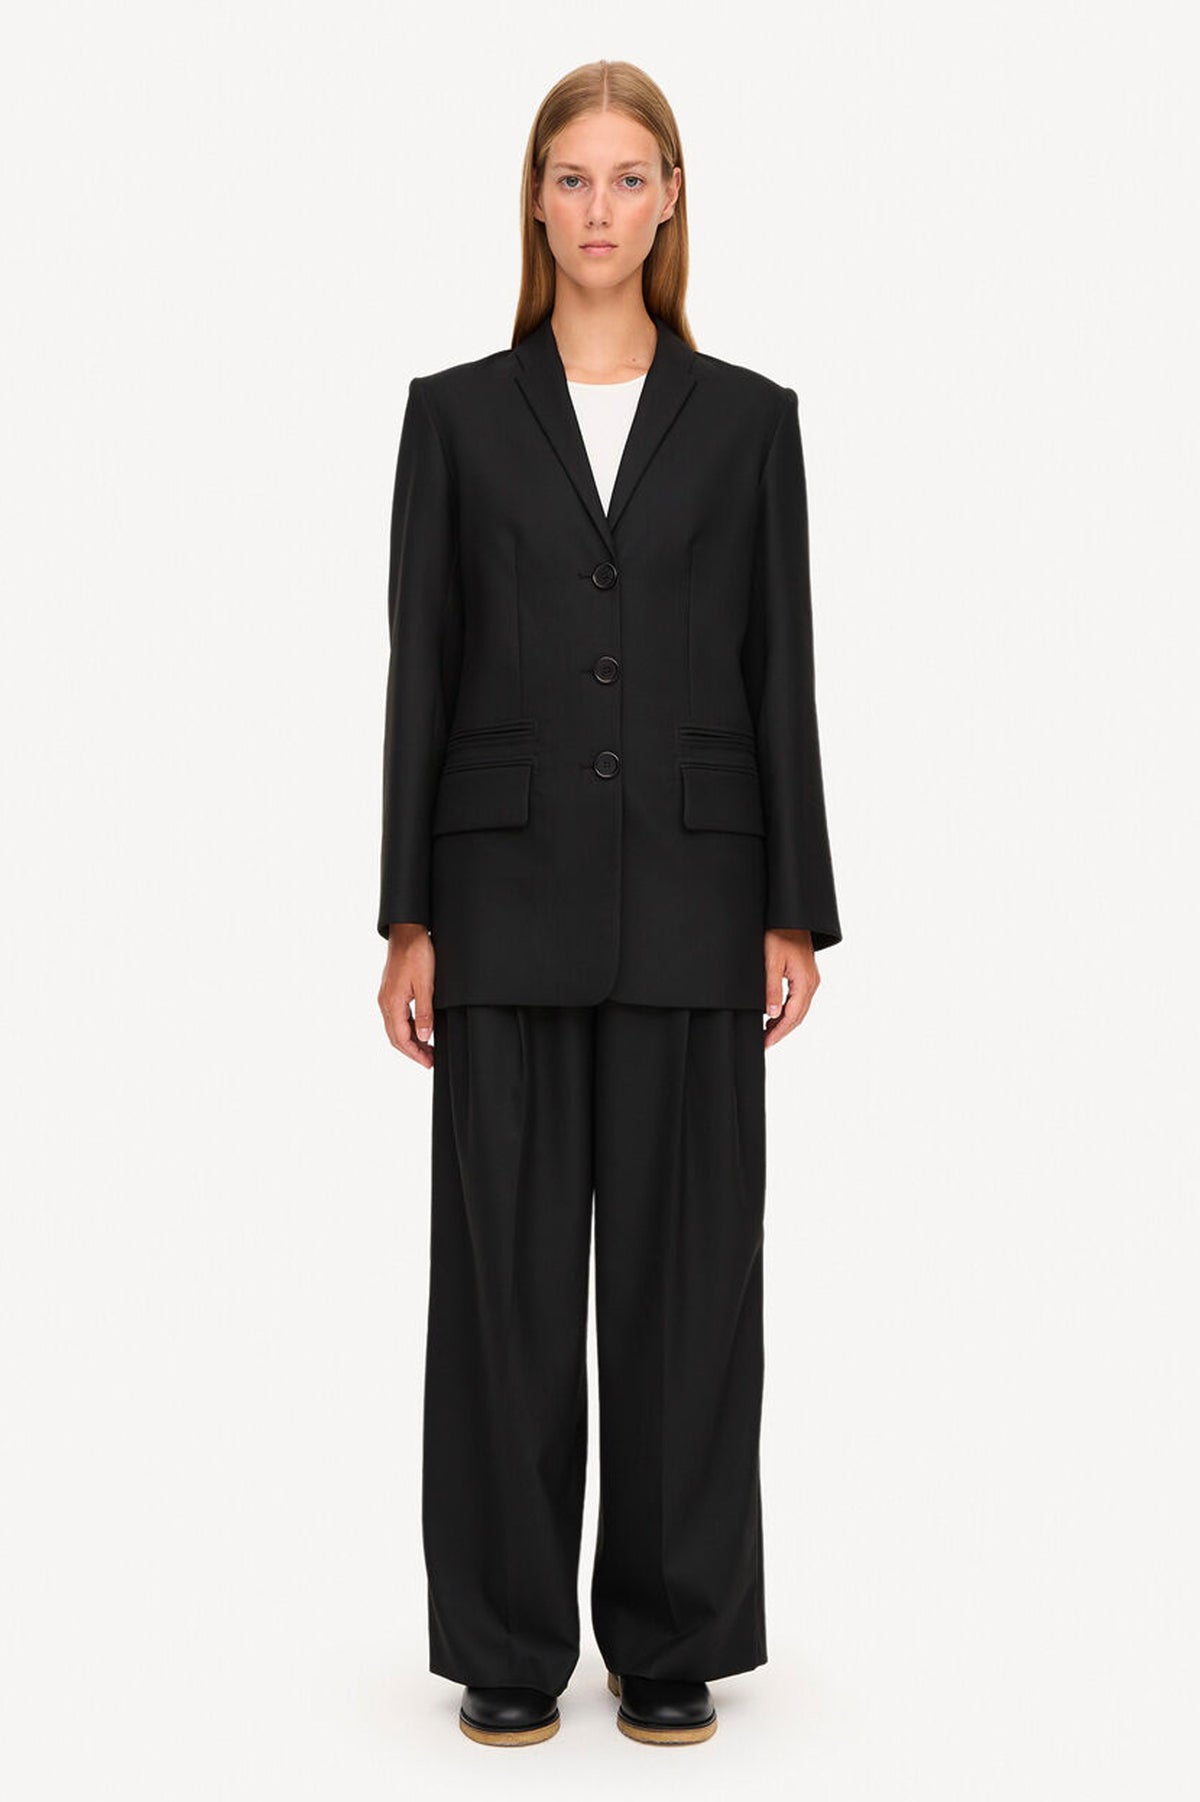 Cymbaria High-Waisted Trouser in Black